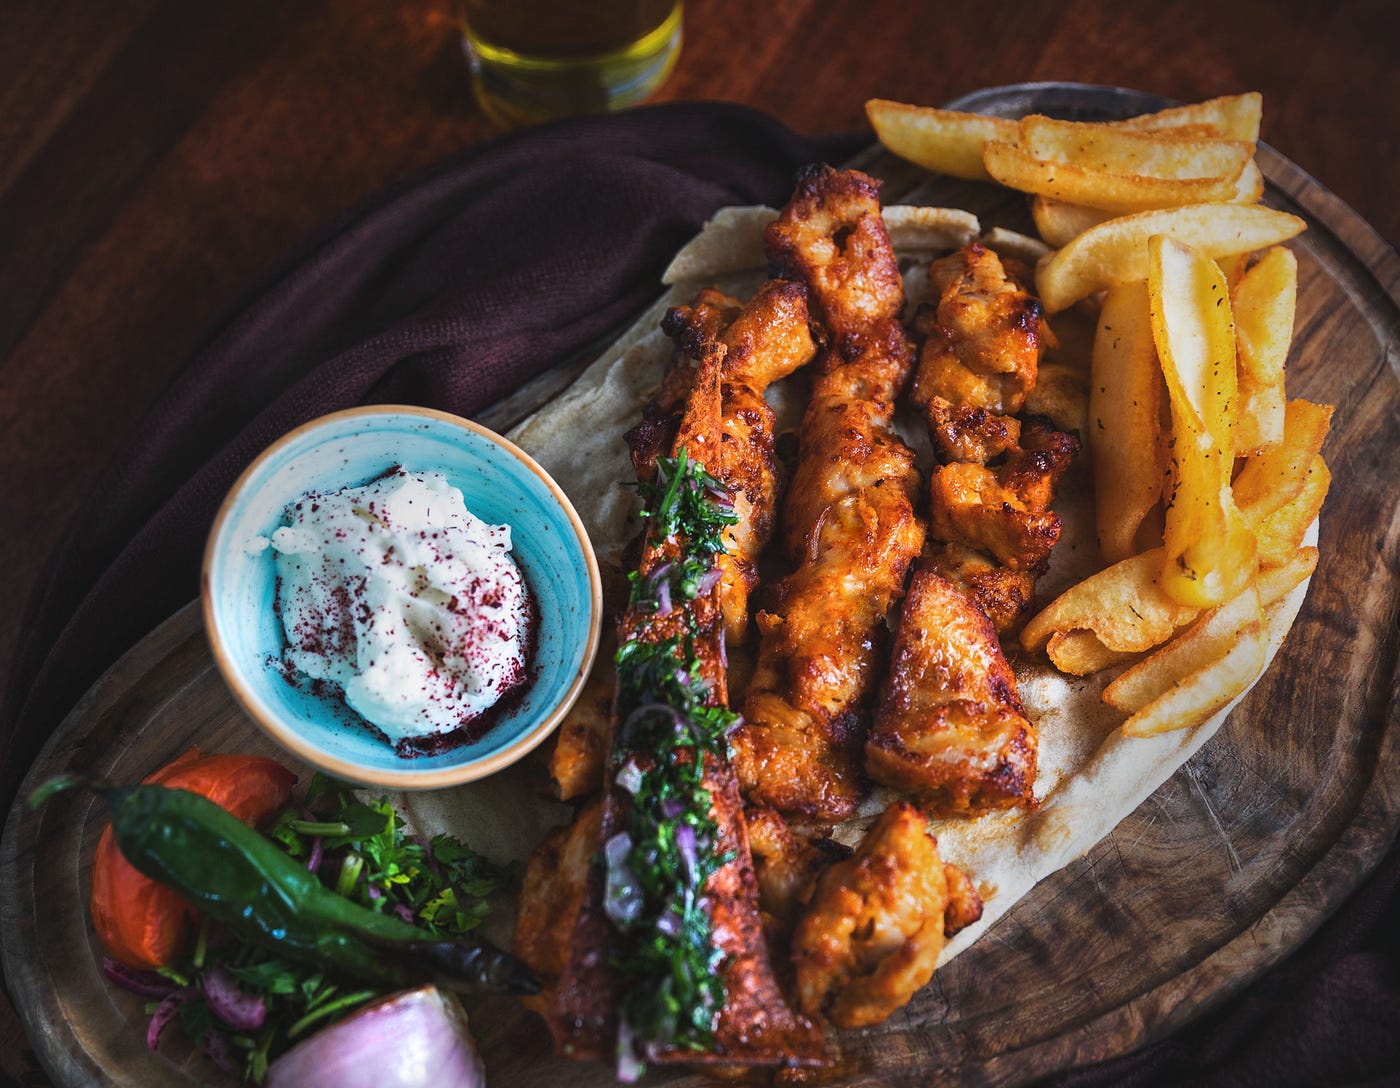 Grilled chicken kebab, chips, spiced yoghurt and garnish served on a chopping board.